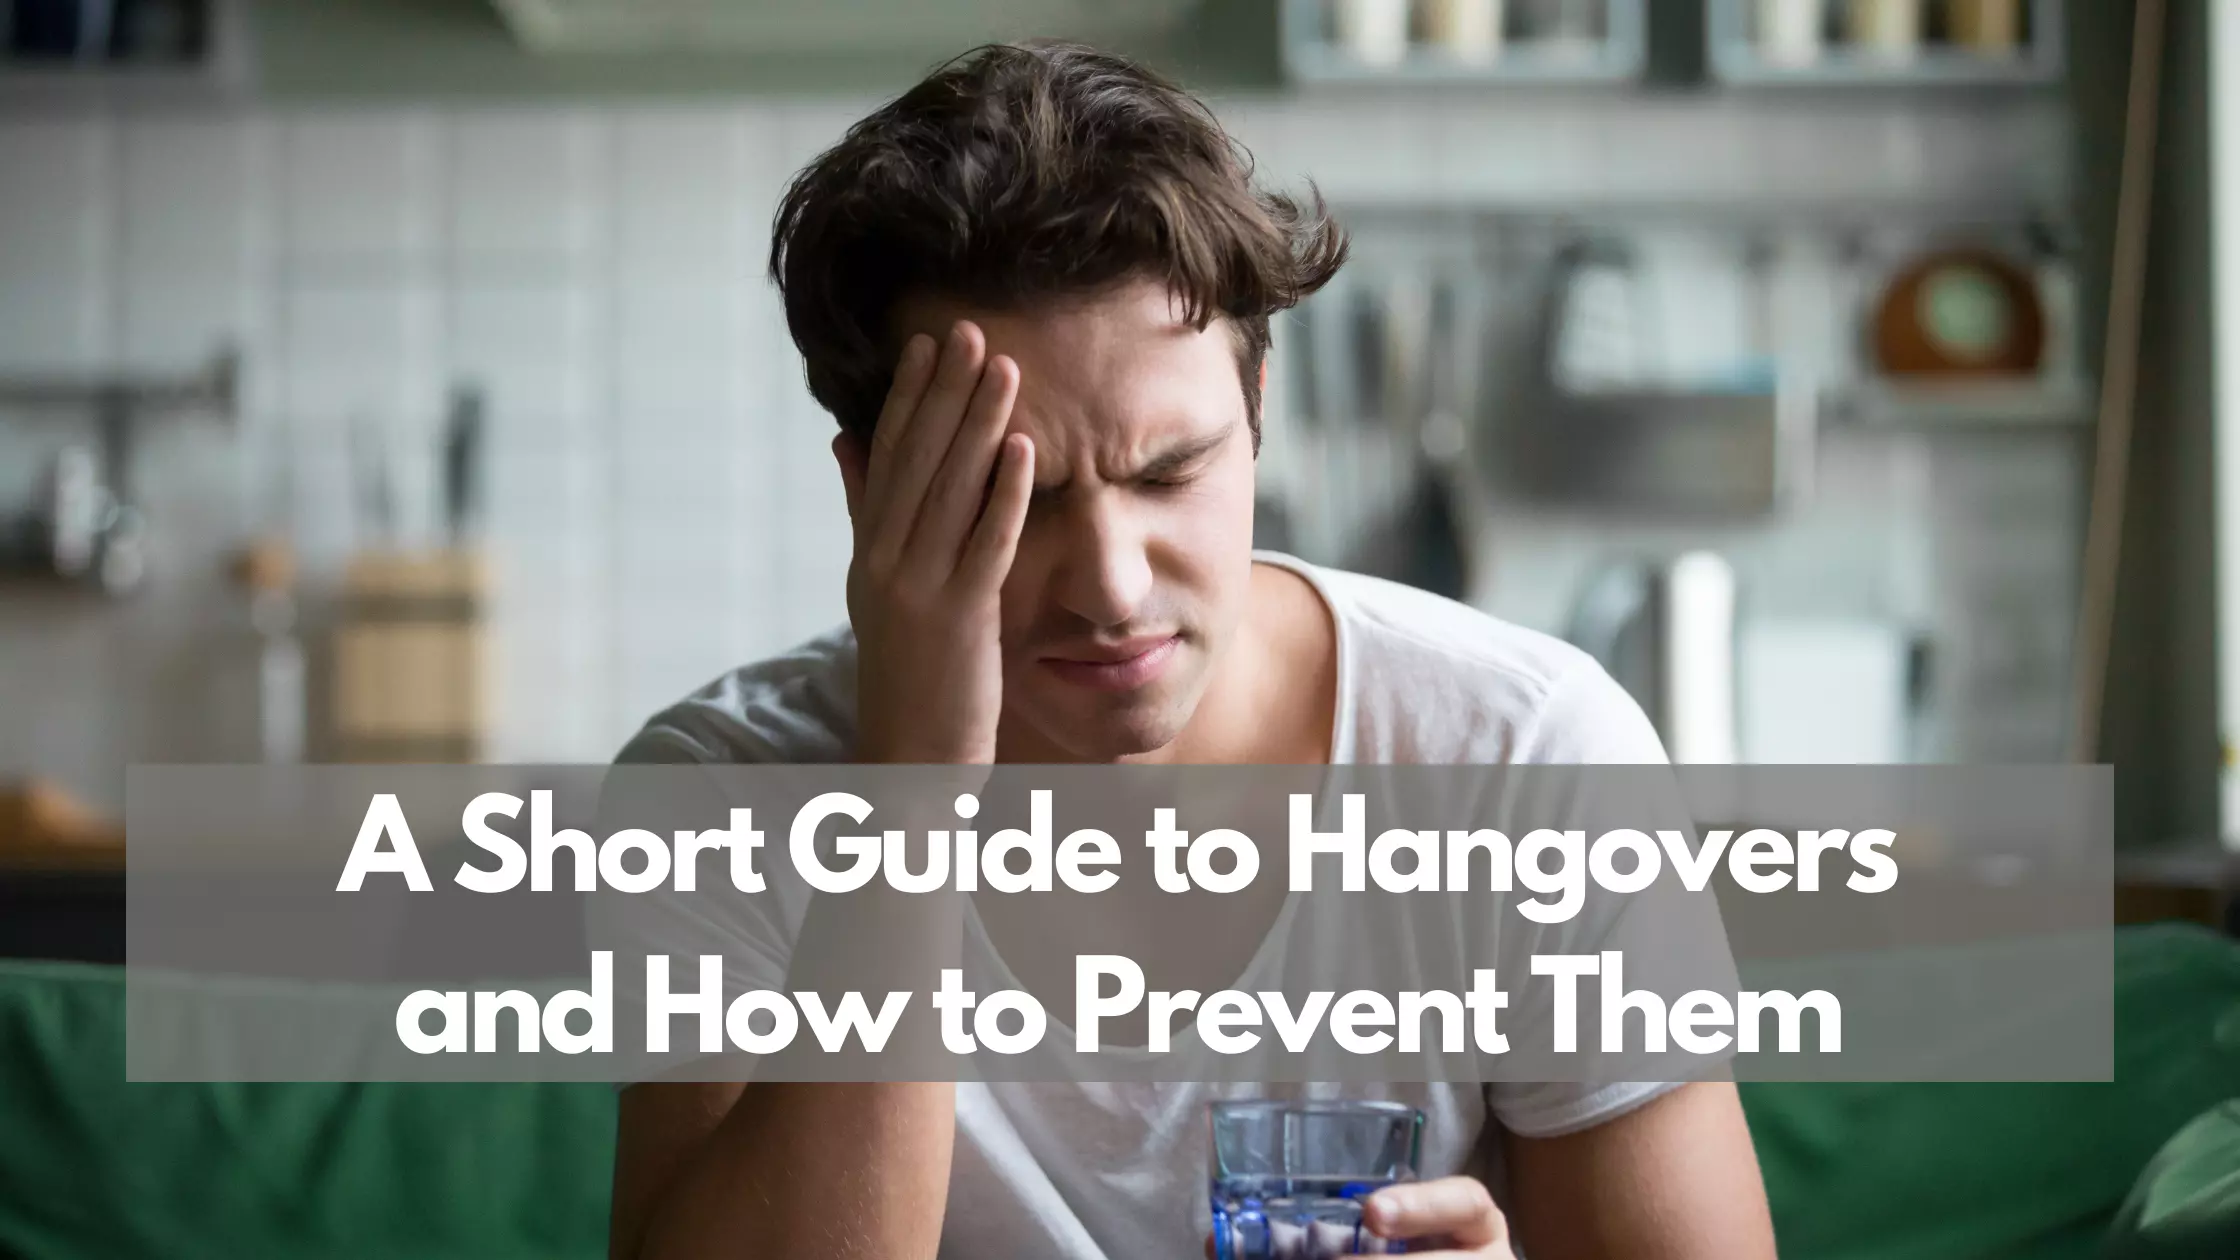 A Short Guide to Hangovers and How to Prevent Them